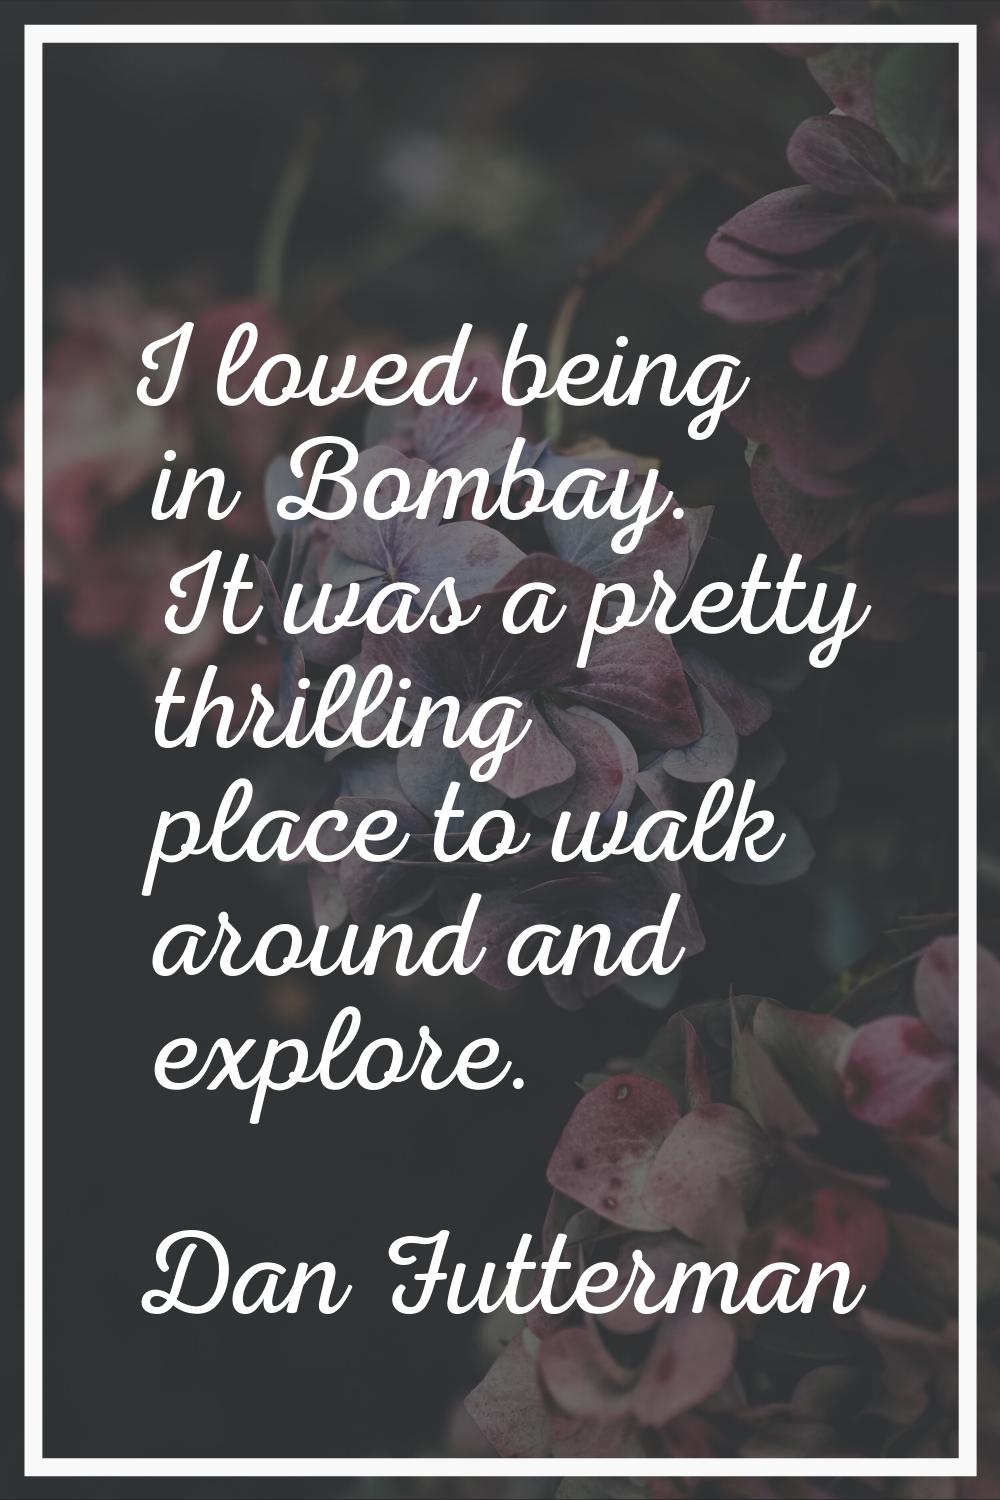 I loved being in Bombay. It was a pretty thrilling place to walk around and explore.